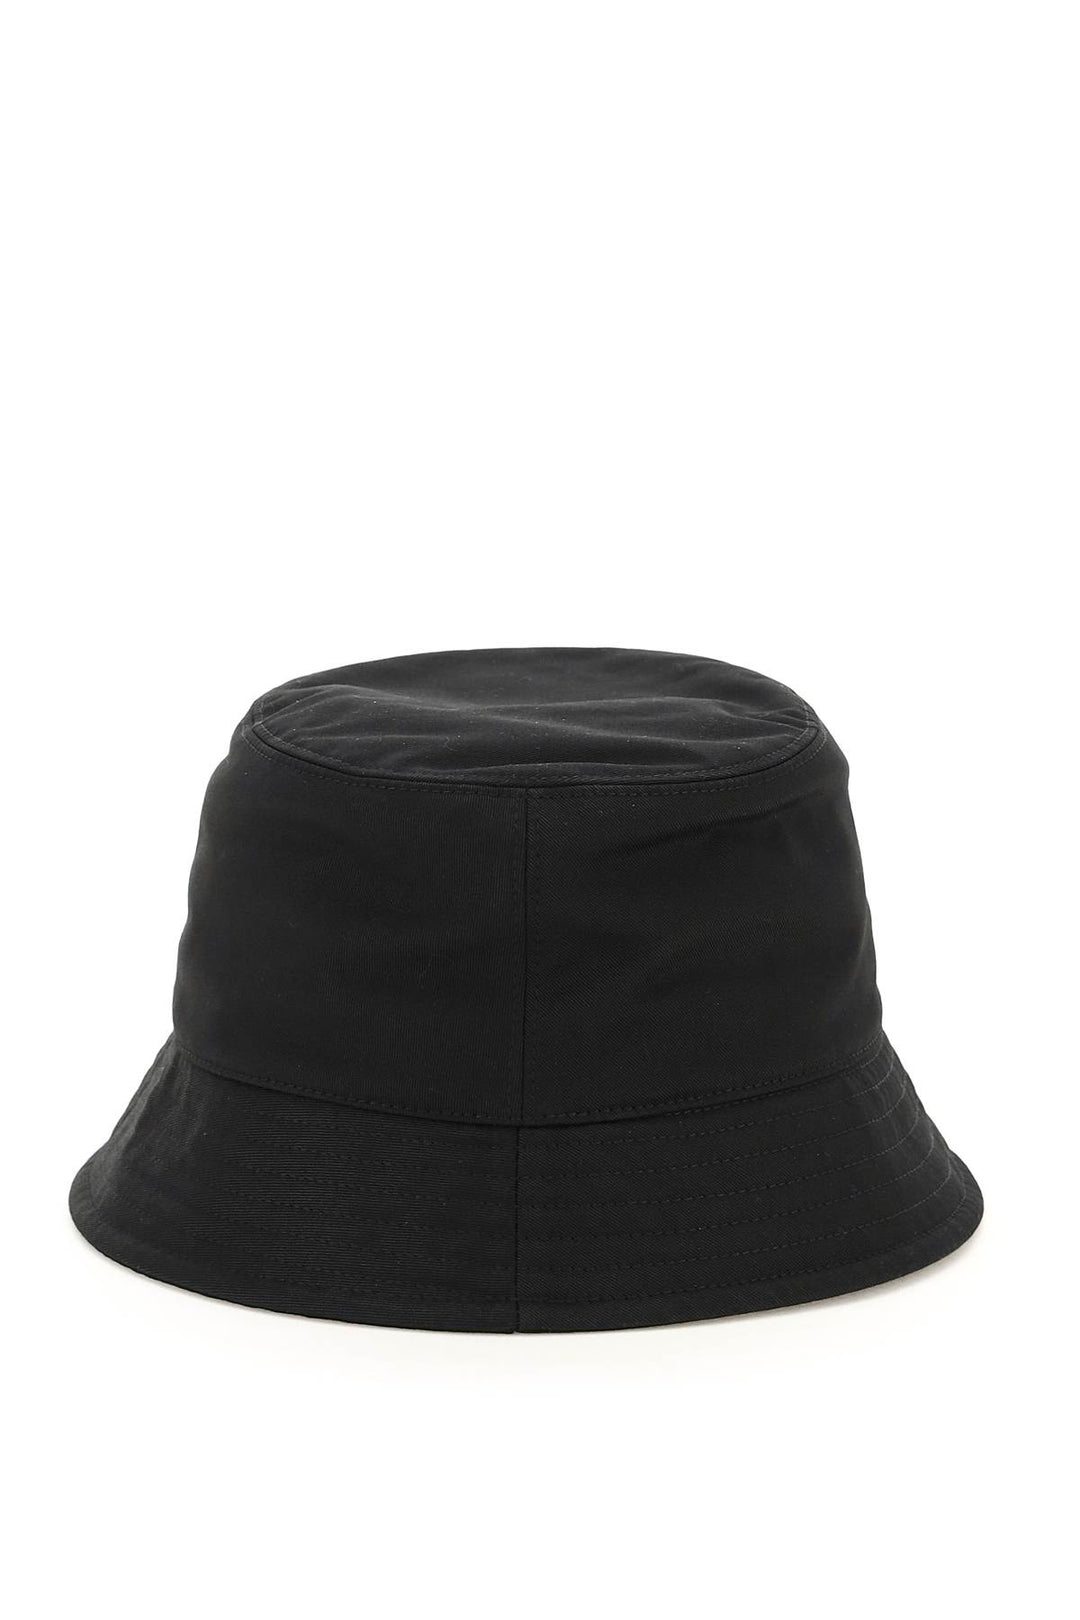 Dsquared2 'icon' bucket hat-2